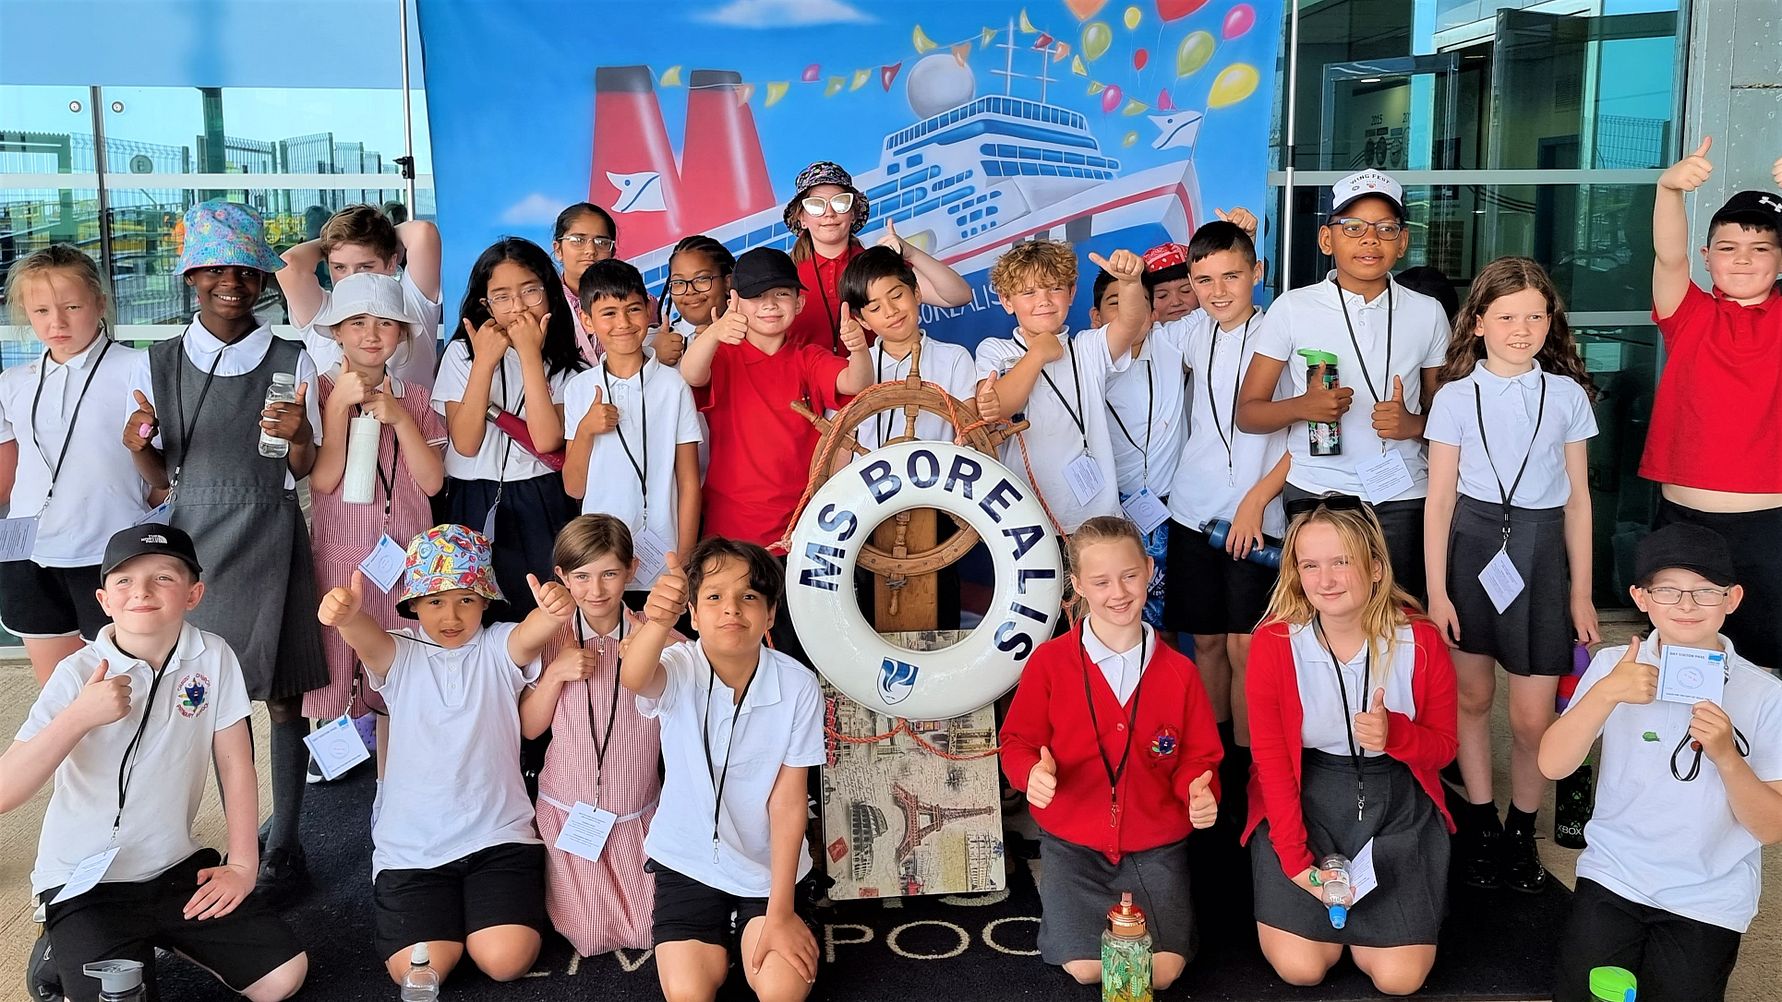 Class of Year 5 students explore career opportunities at Cruise Liverpool with surprise visit on board Fred. Olsen Cruise Lines' Borealis  (Image at LateCruiseNews.com - June 2023)